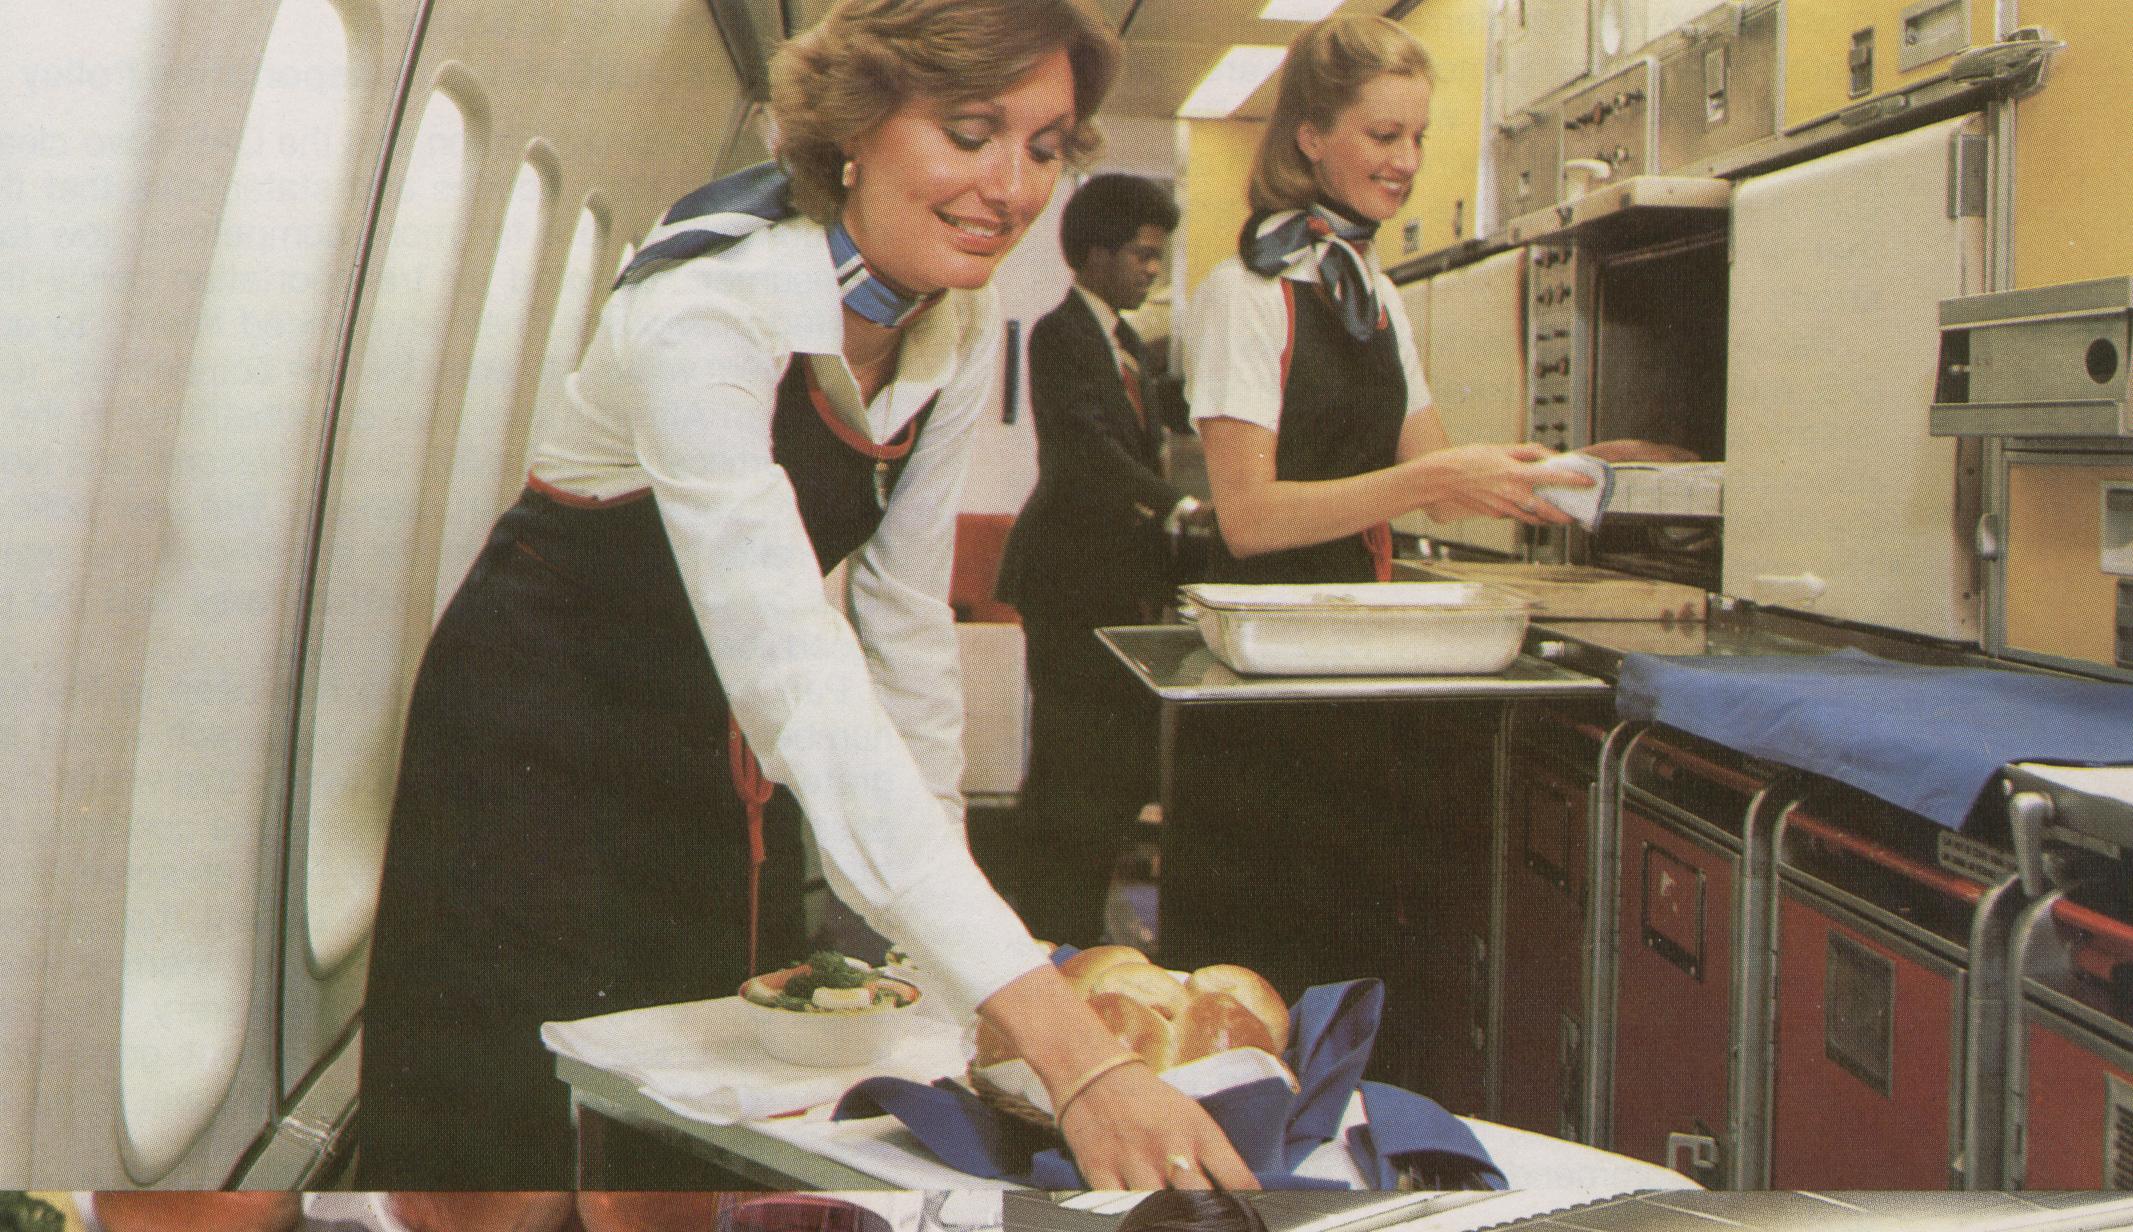 1977 Crew members prepare a meal in the galley of a Pan Am Boeing 747SP.  Sue Smith prepares the cart.  Judy Skartvedt is standing by the open oven and  Antonio Gooding is working at the rear of the galley.